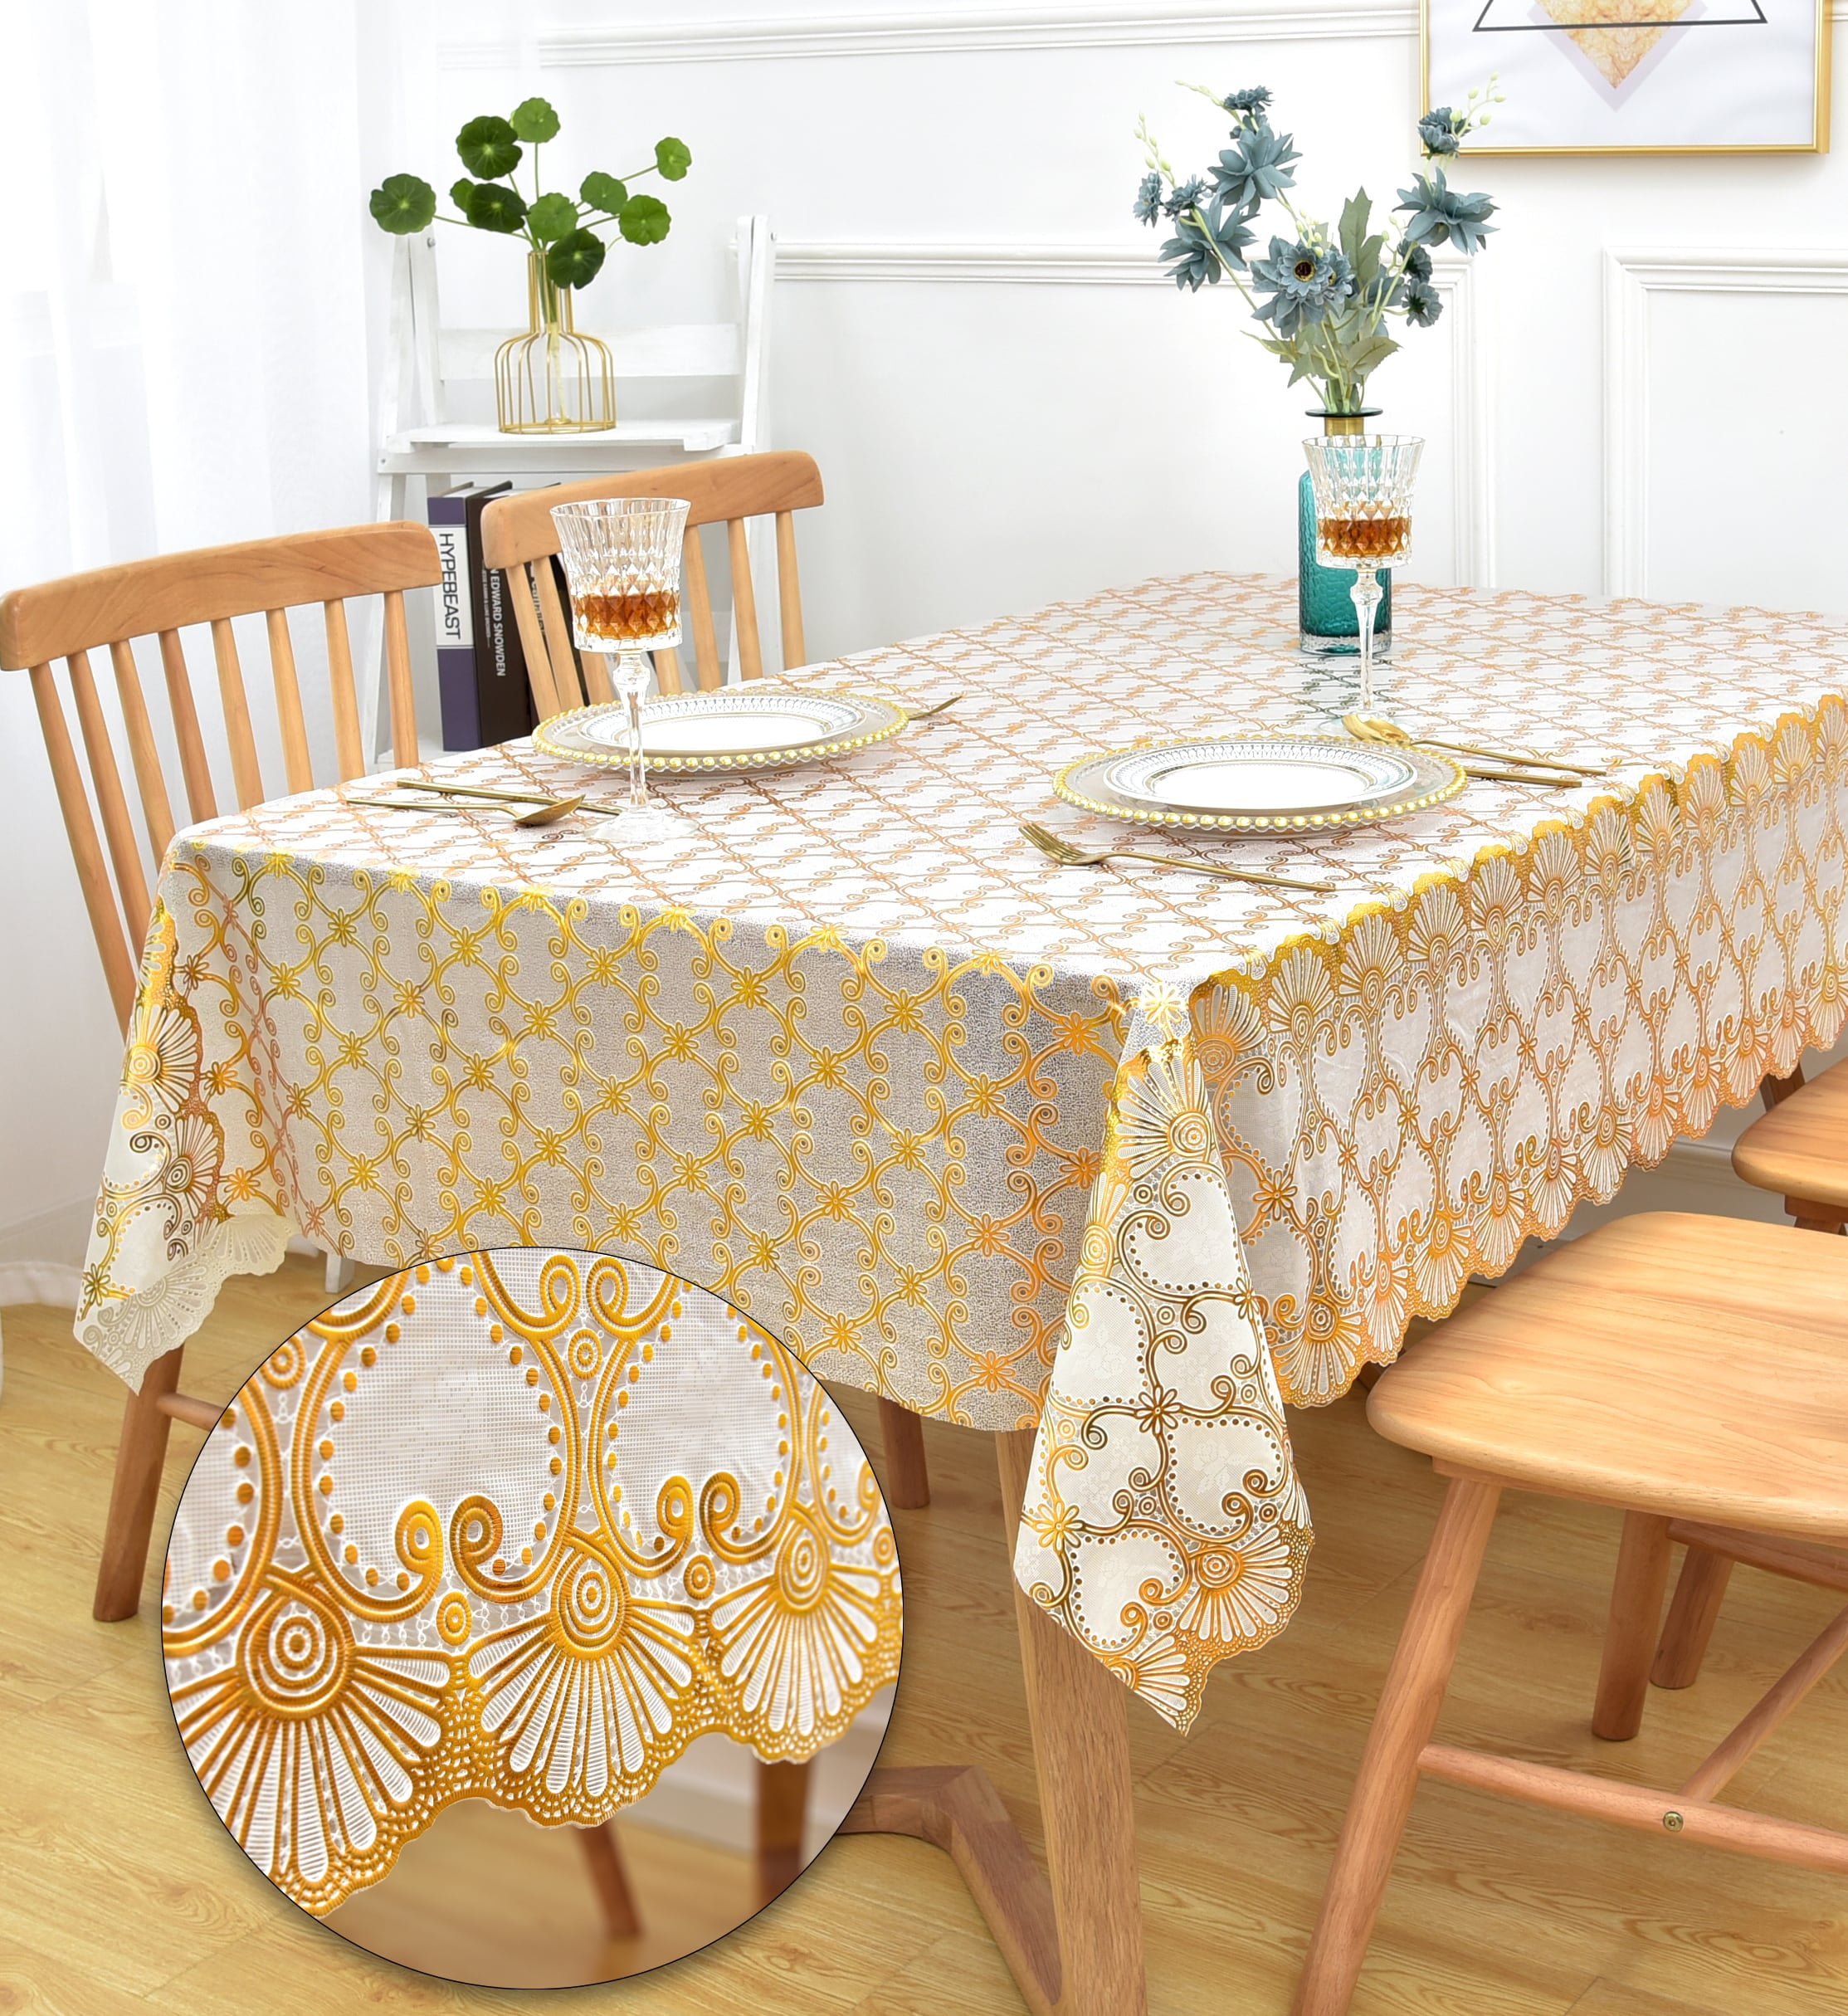 Fondlier Vinyl Rectangular Tablecloth with Stamping Gold